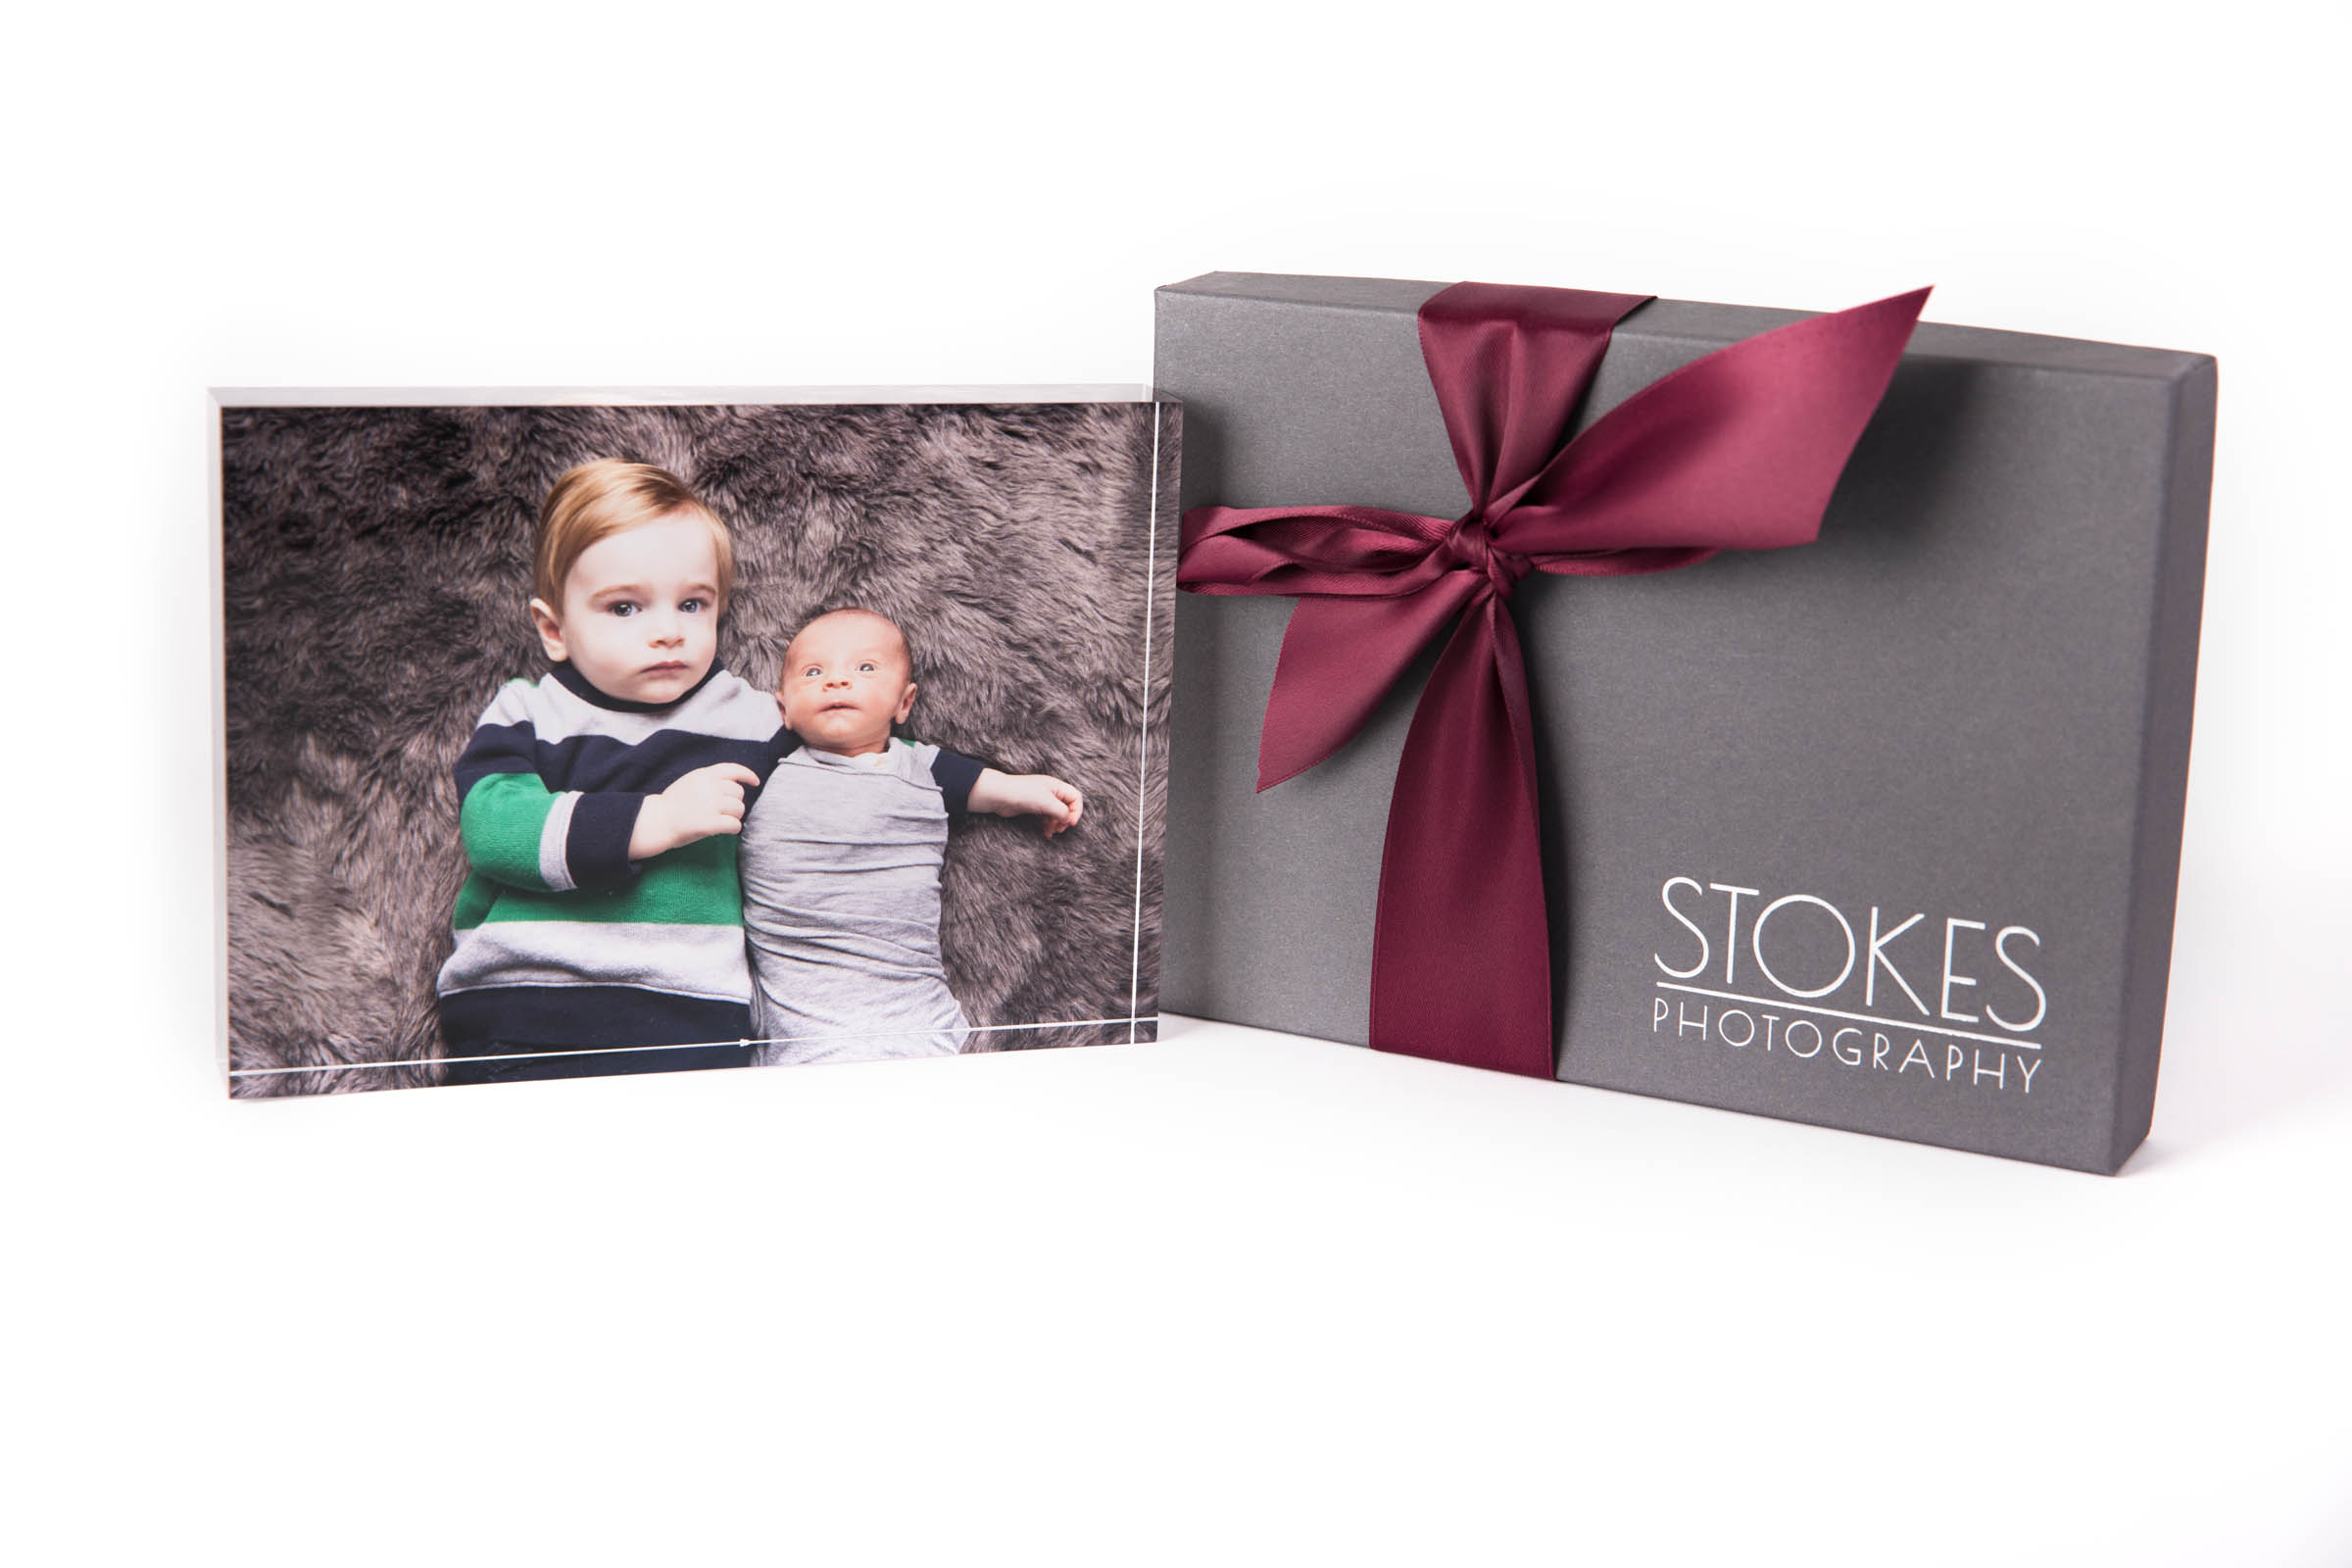 Beautiful acrylic block of brother holding baby on top of brown flokati with stoke photography gift box